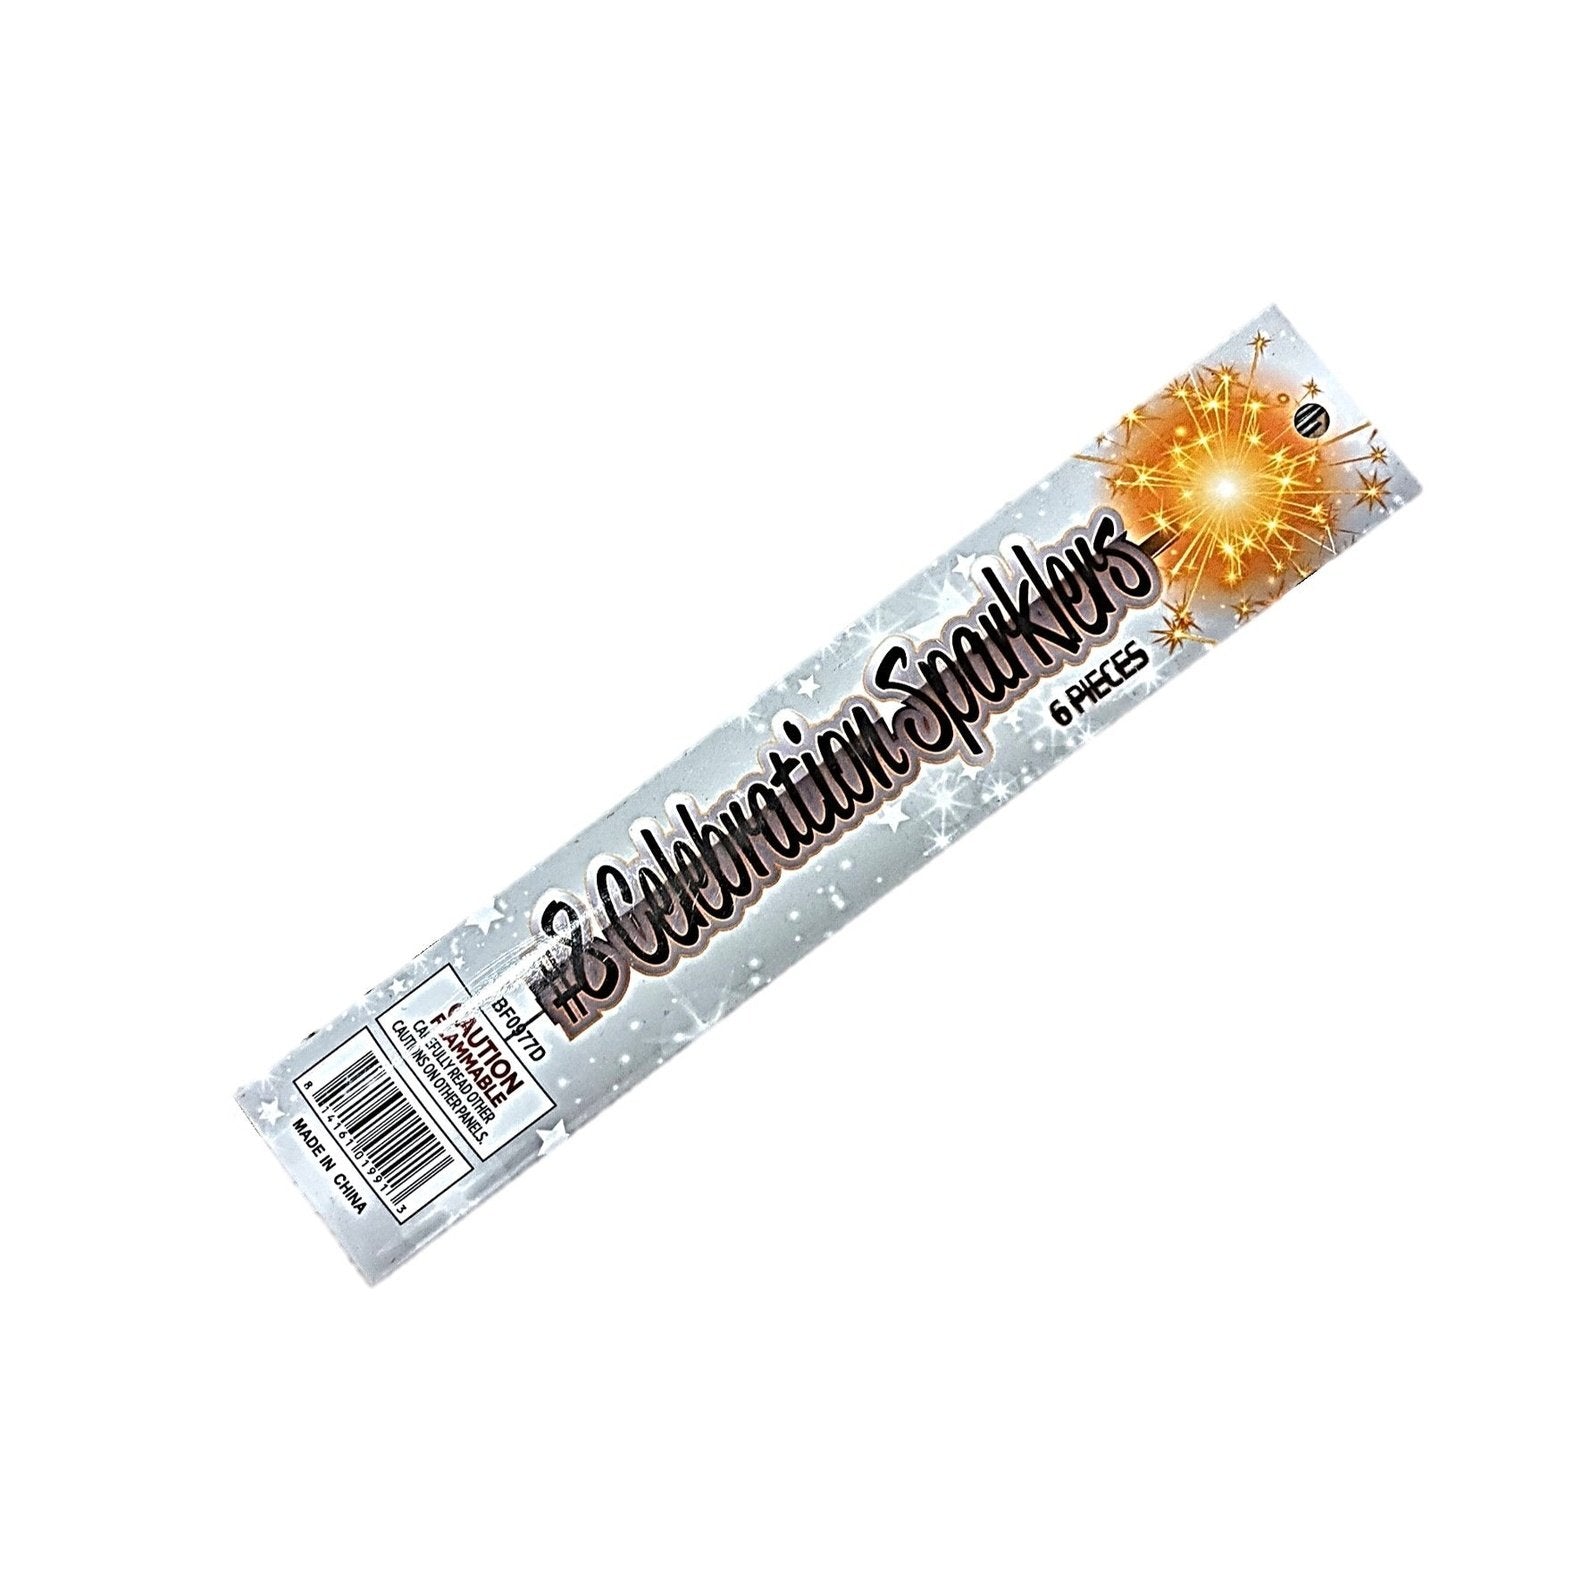 6 Piece #8 Gold Sparklers - 1 Pack of 6 Sparklers